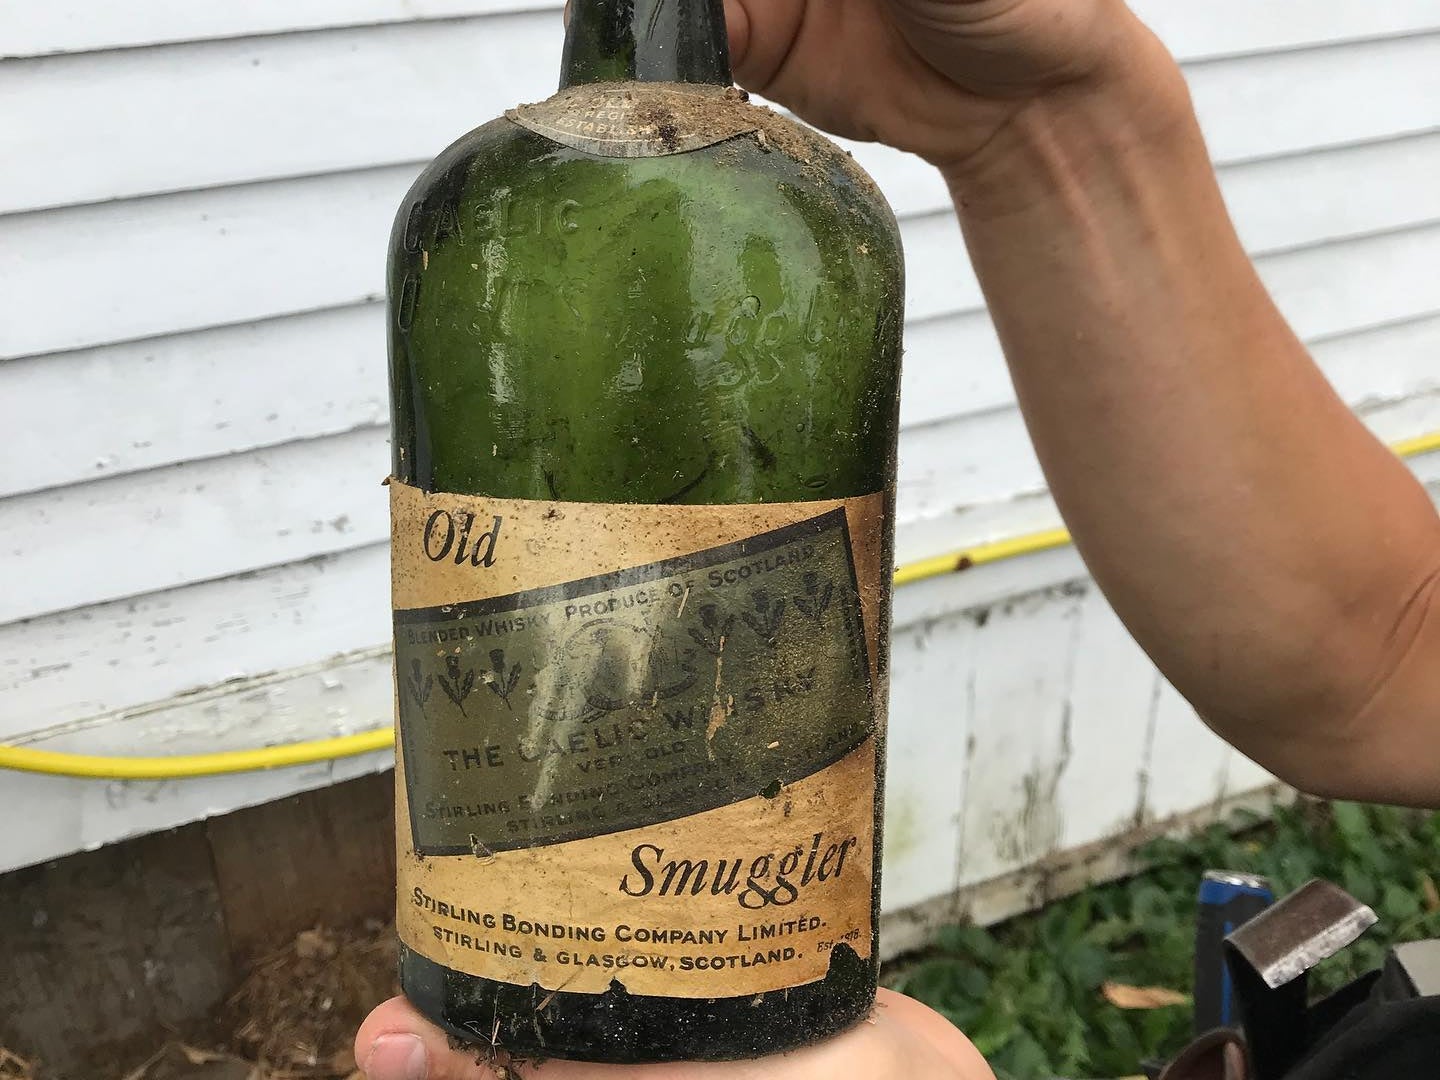 Out of the initial bottles found in the structure of the house about 13 were full